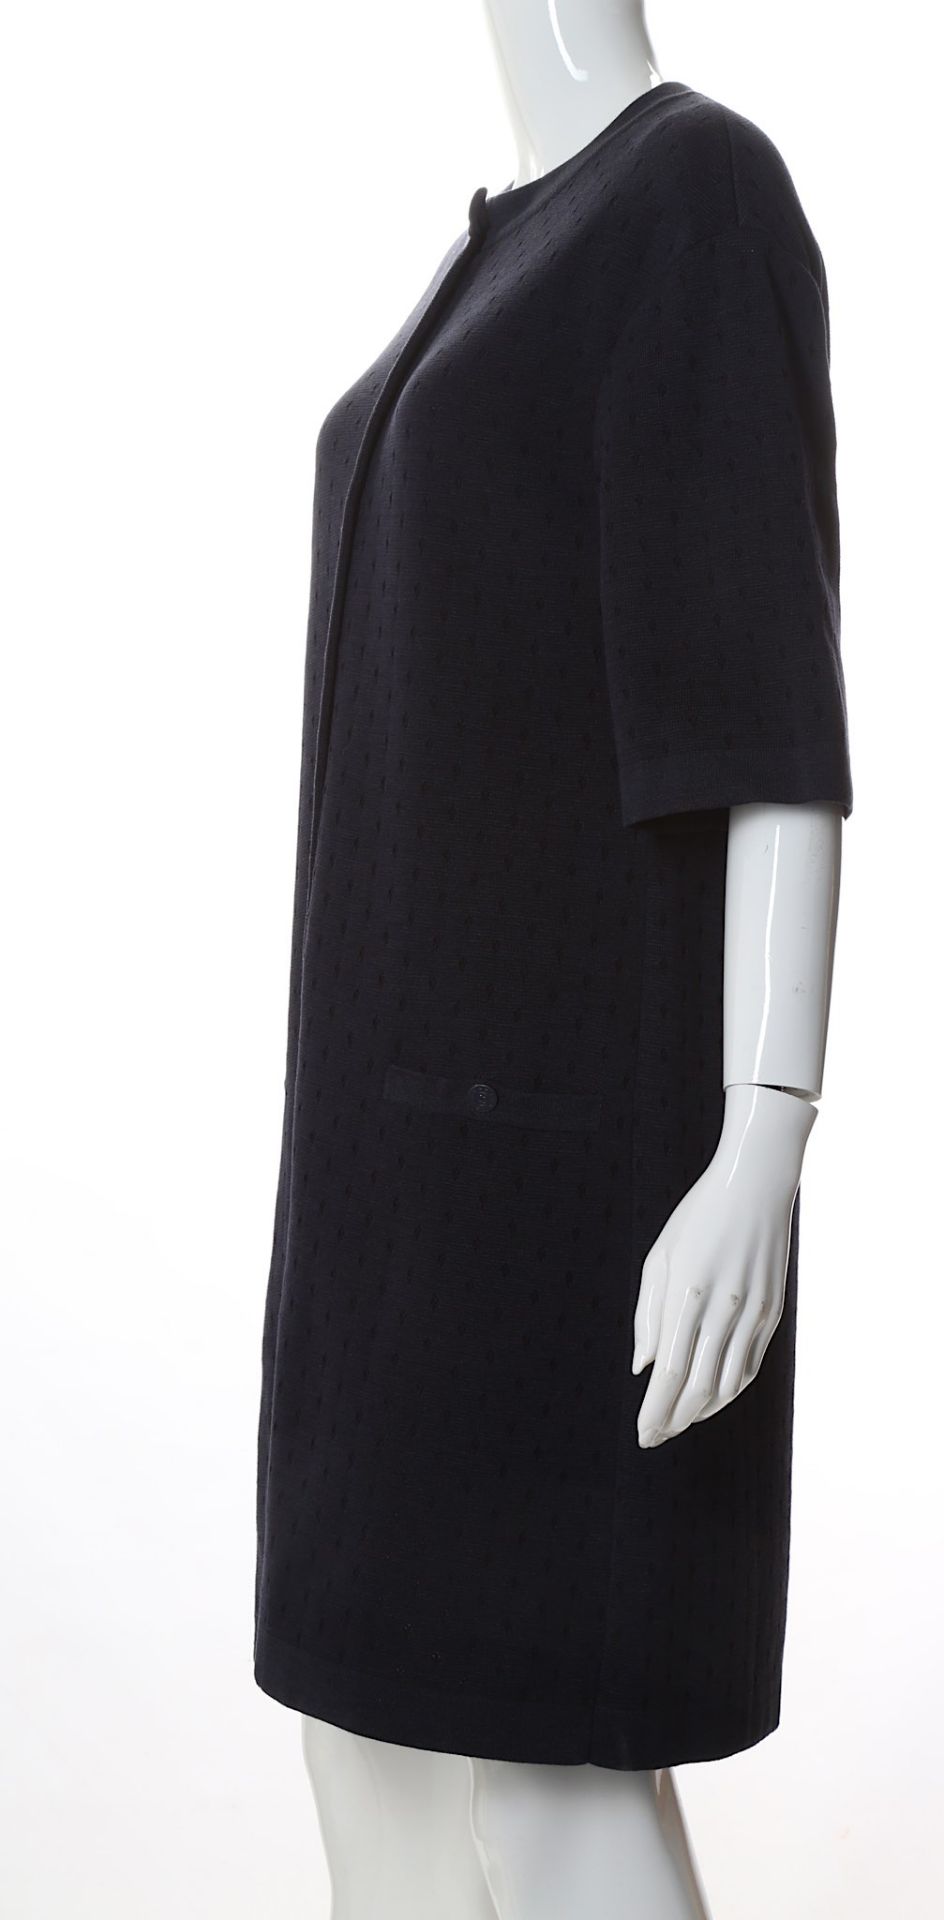 Chanel Midnight Blue Cotton and Silk Mix Dress, sh - Image 3 of 4